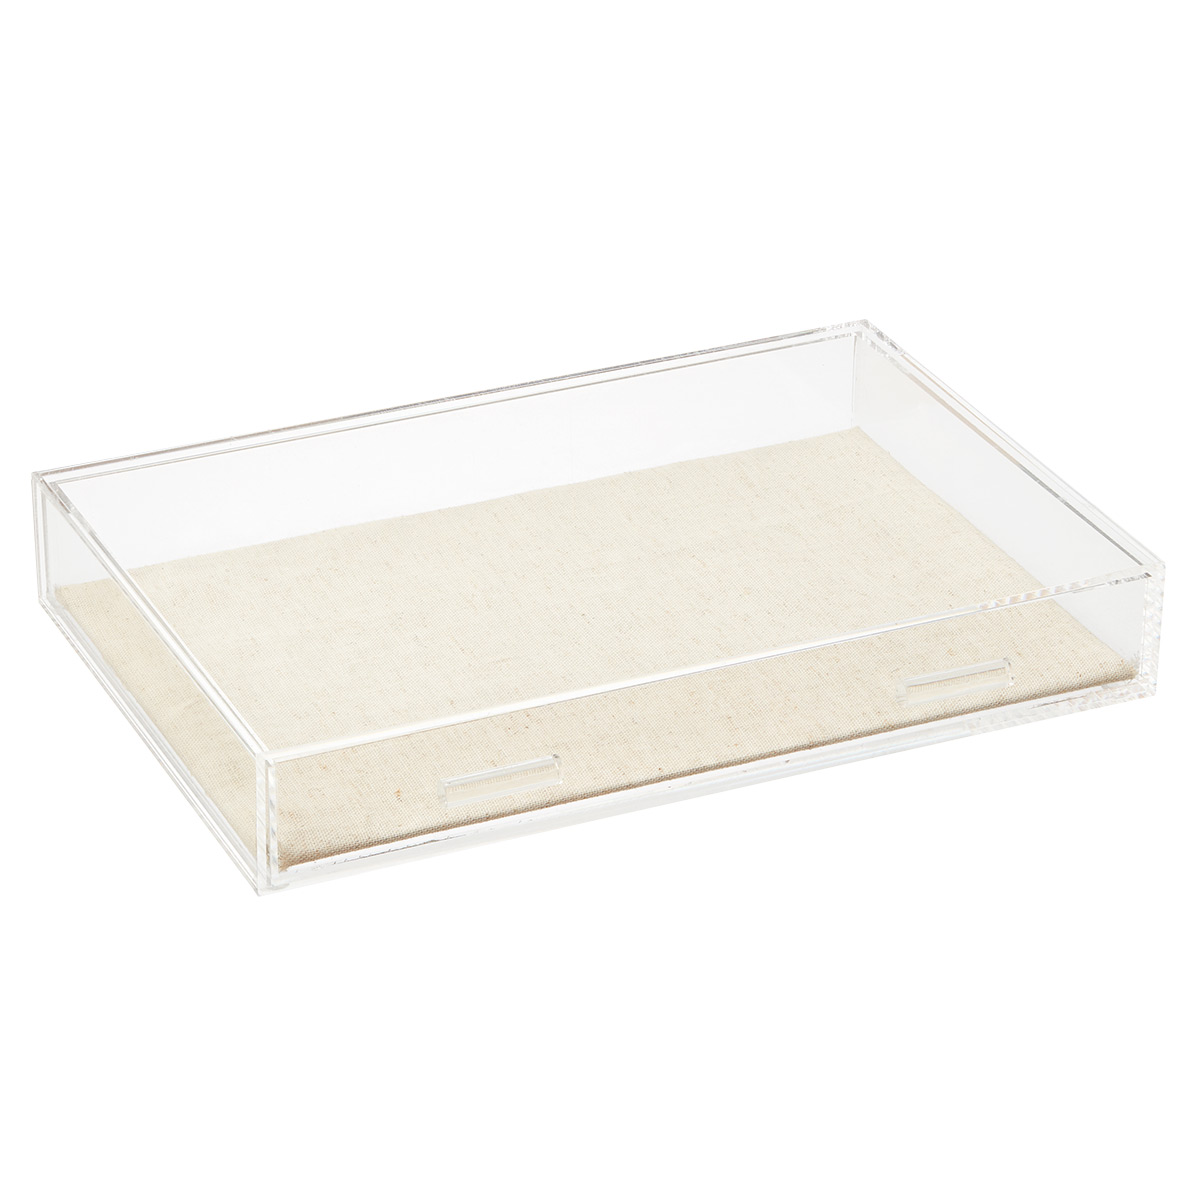 https://www.containerstore.com/catalogimages/391652/10081573-1-compartment-wide-acrylic-.jpg